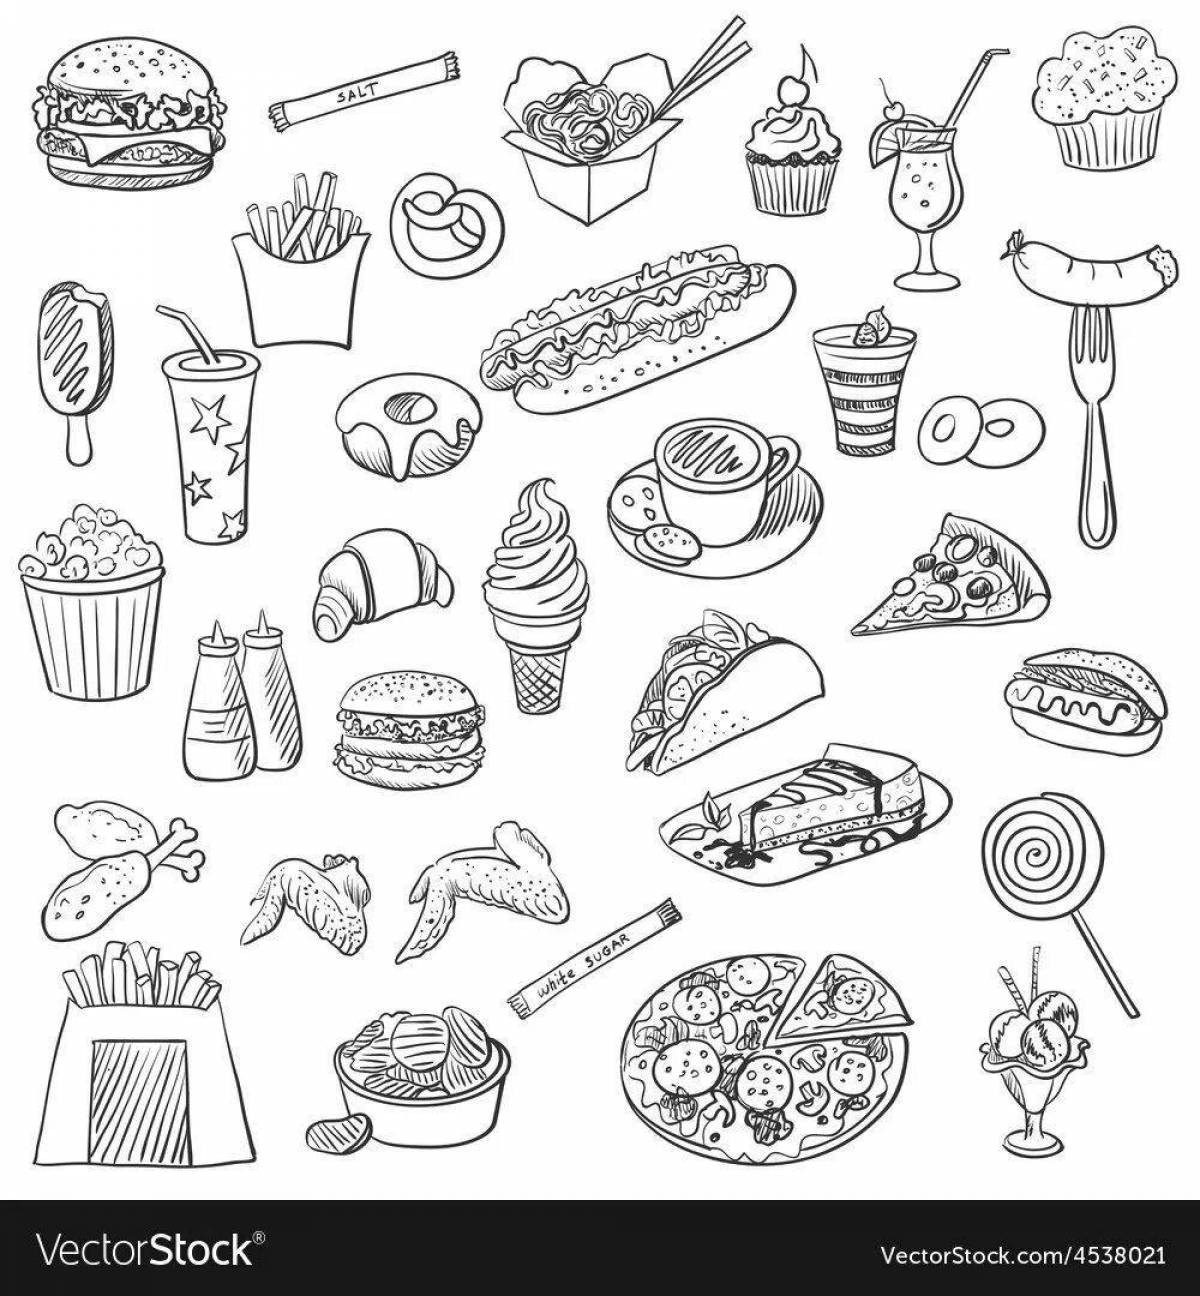 Coloring book tantalizing healthy foods